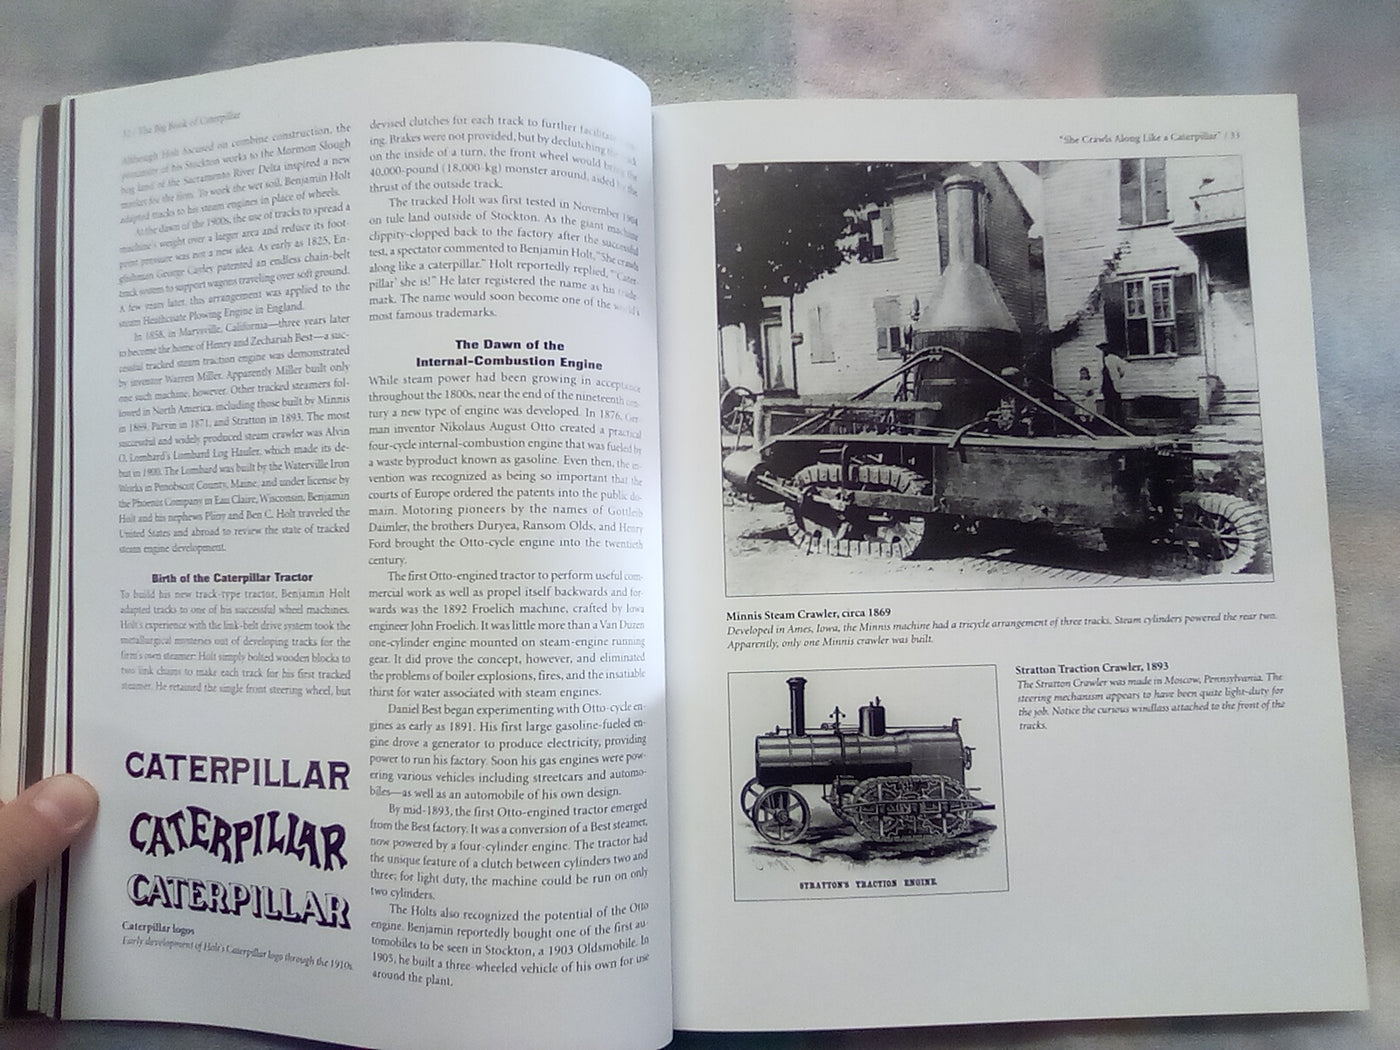 The Big Book of Caterpillar - Complete History of Bulldozers & Tractors